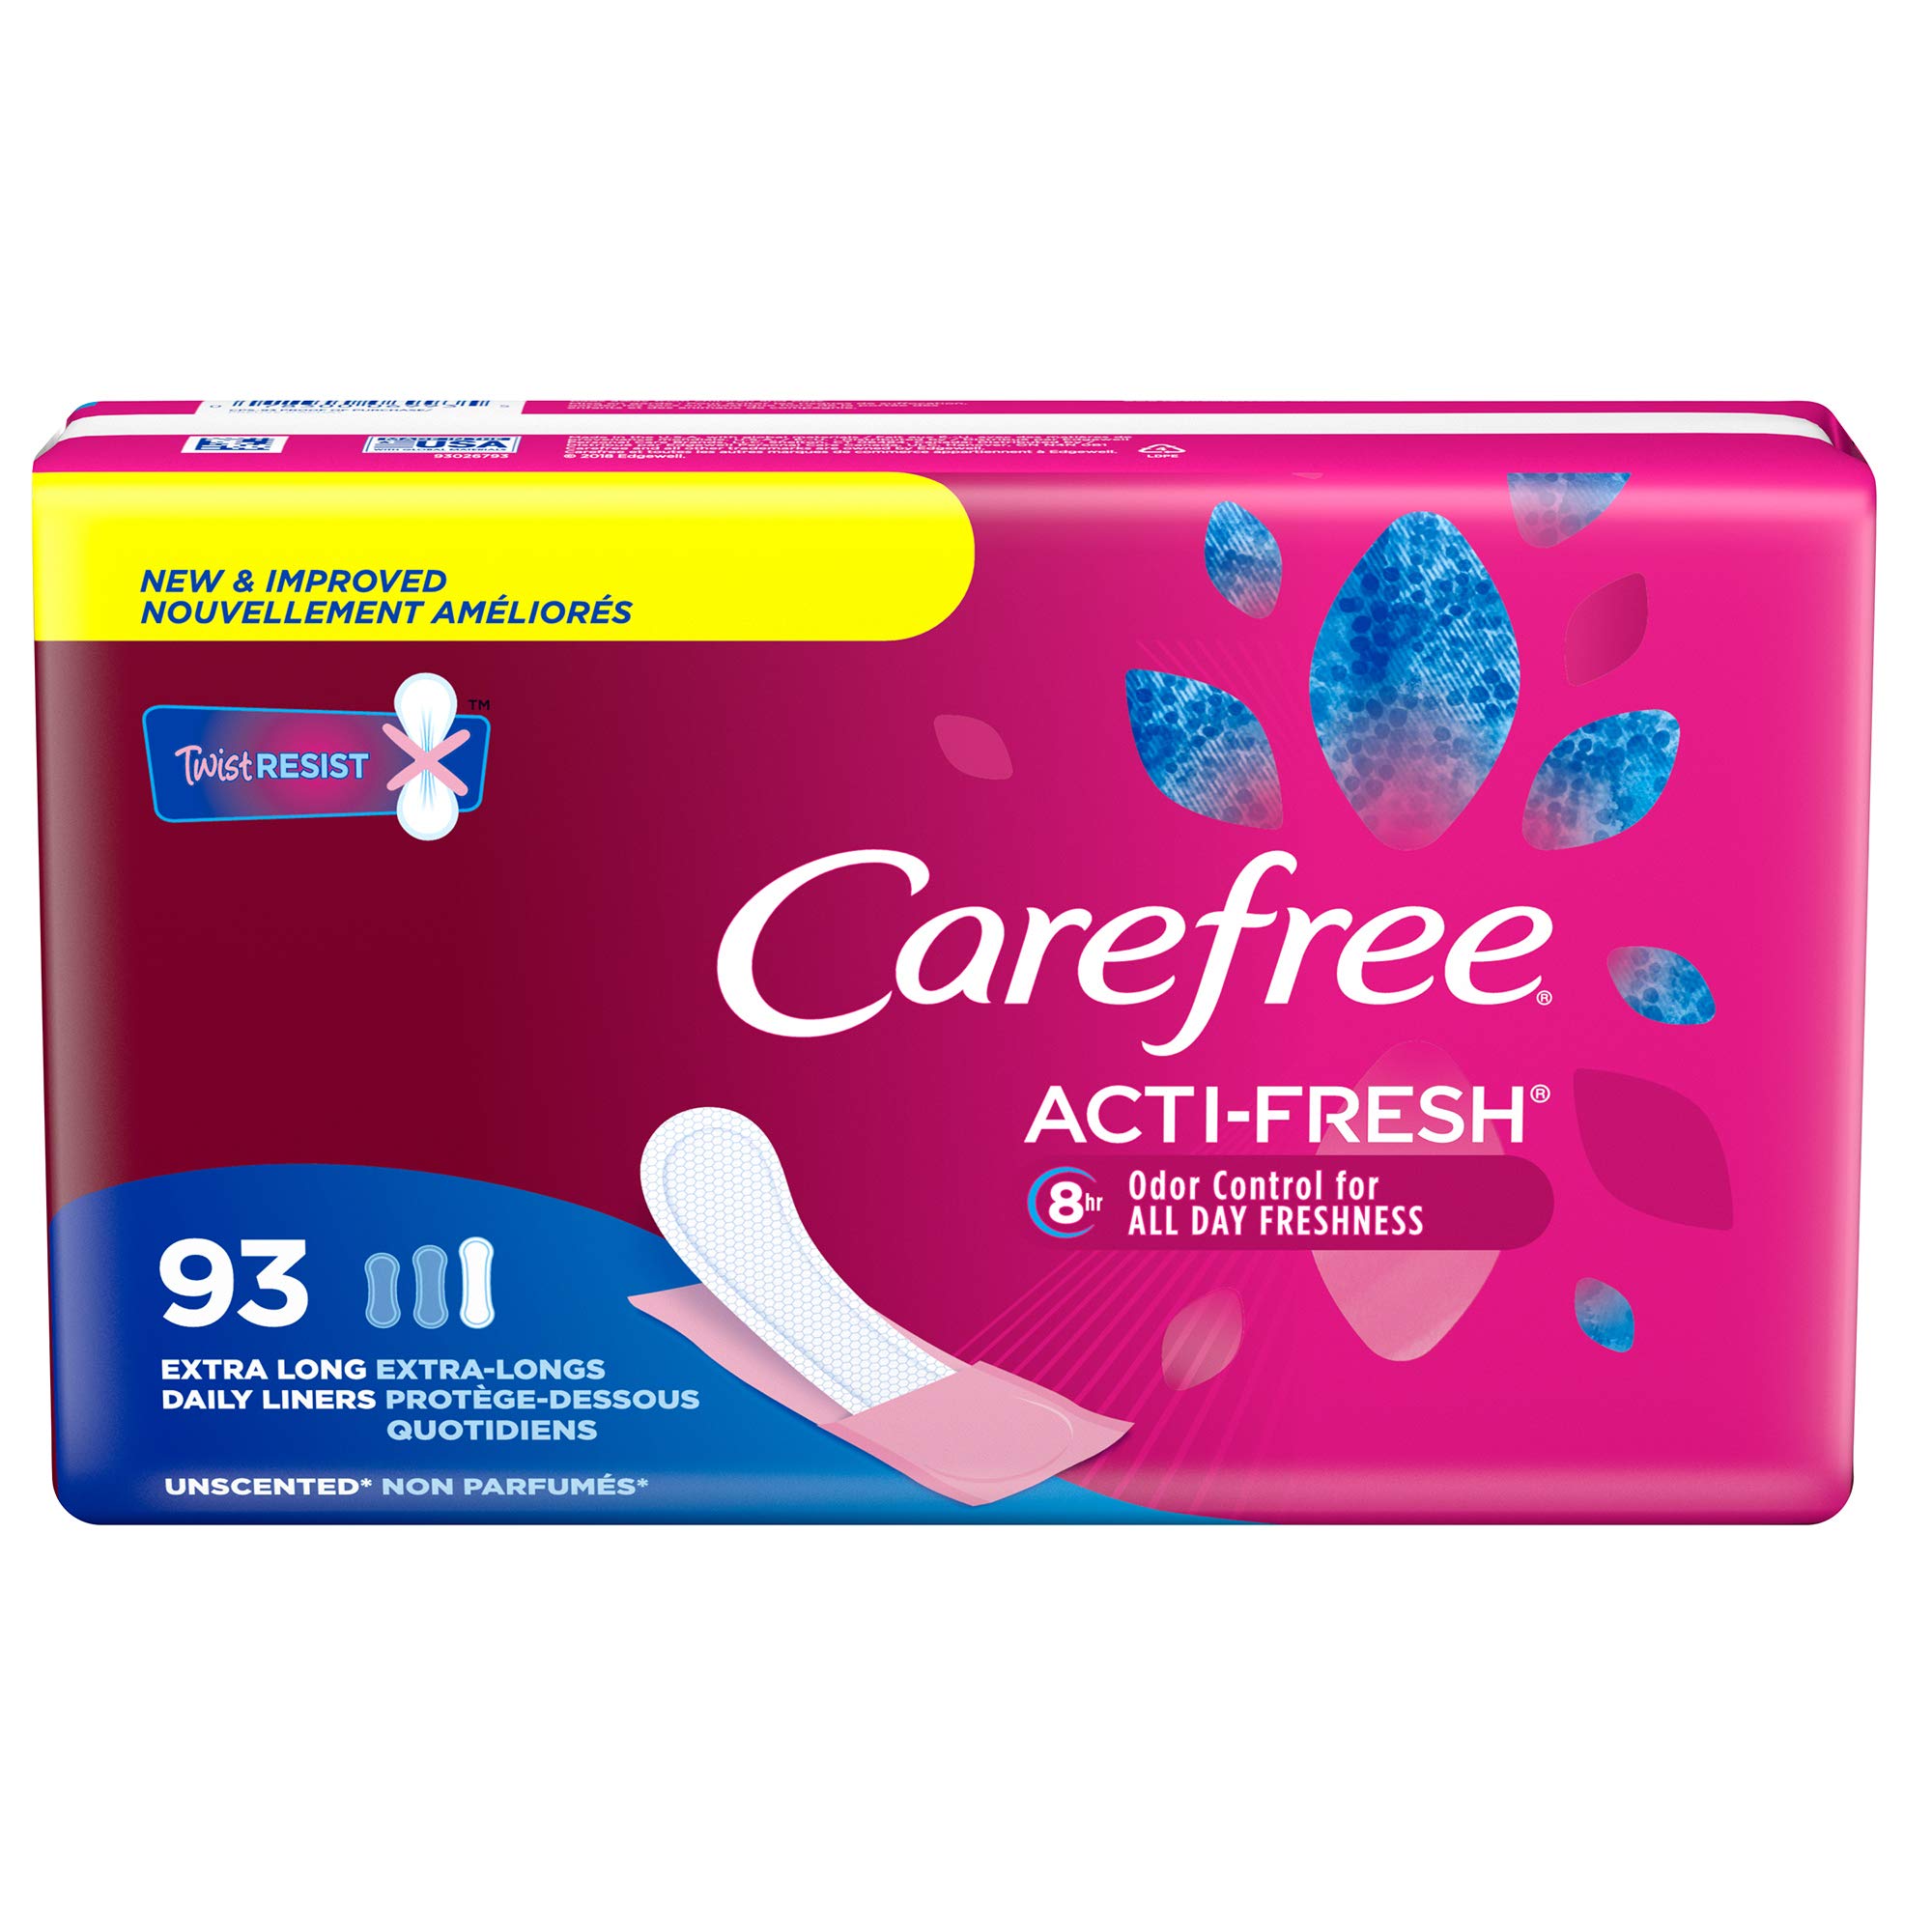 Carefree Acti-Fresh Thin Panty Liners Extra Long 93 Count (Pack of 1)